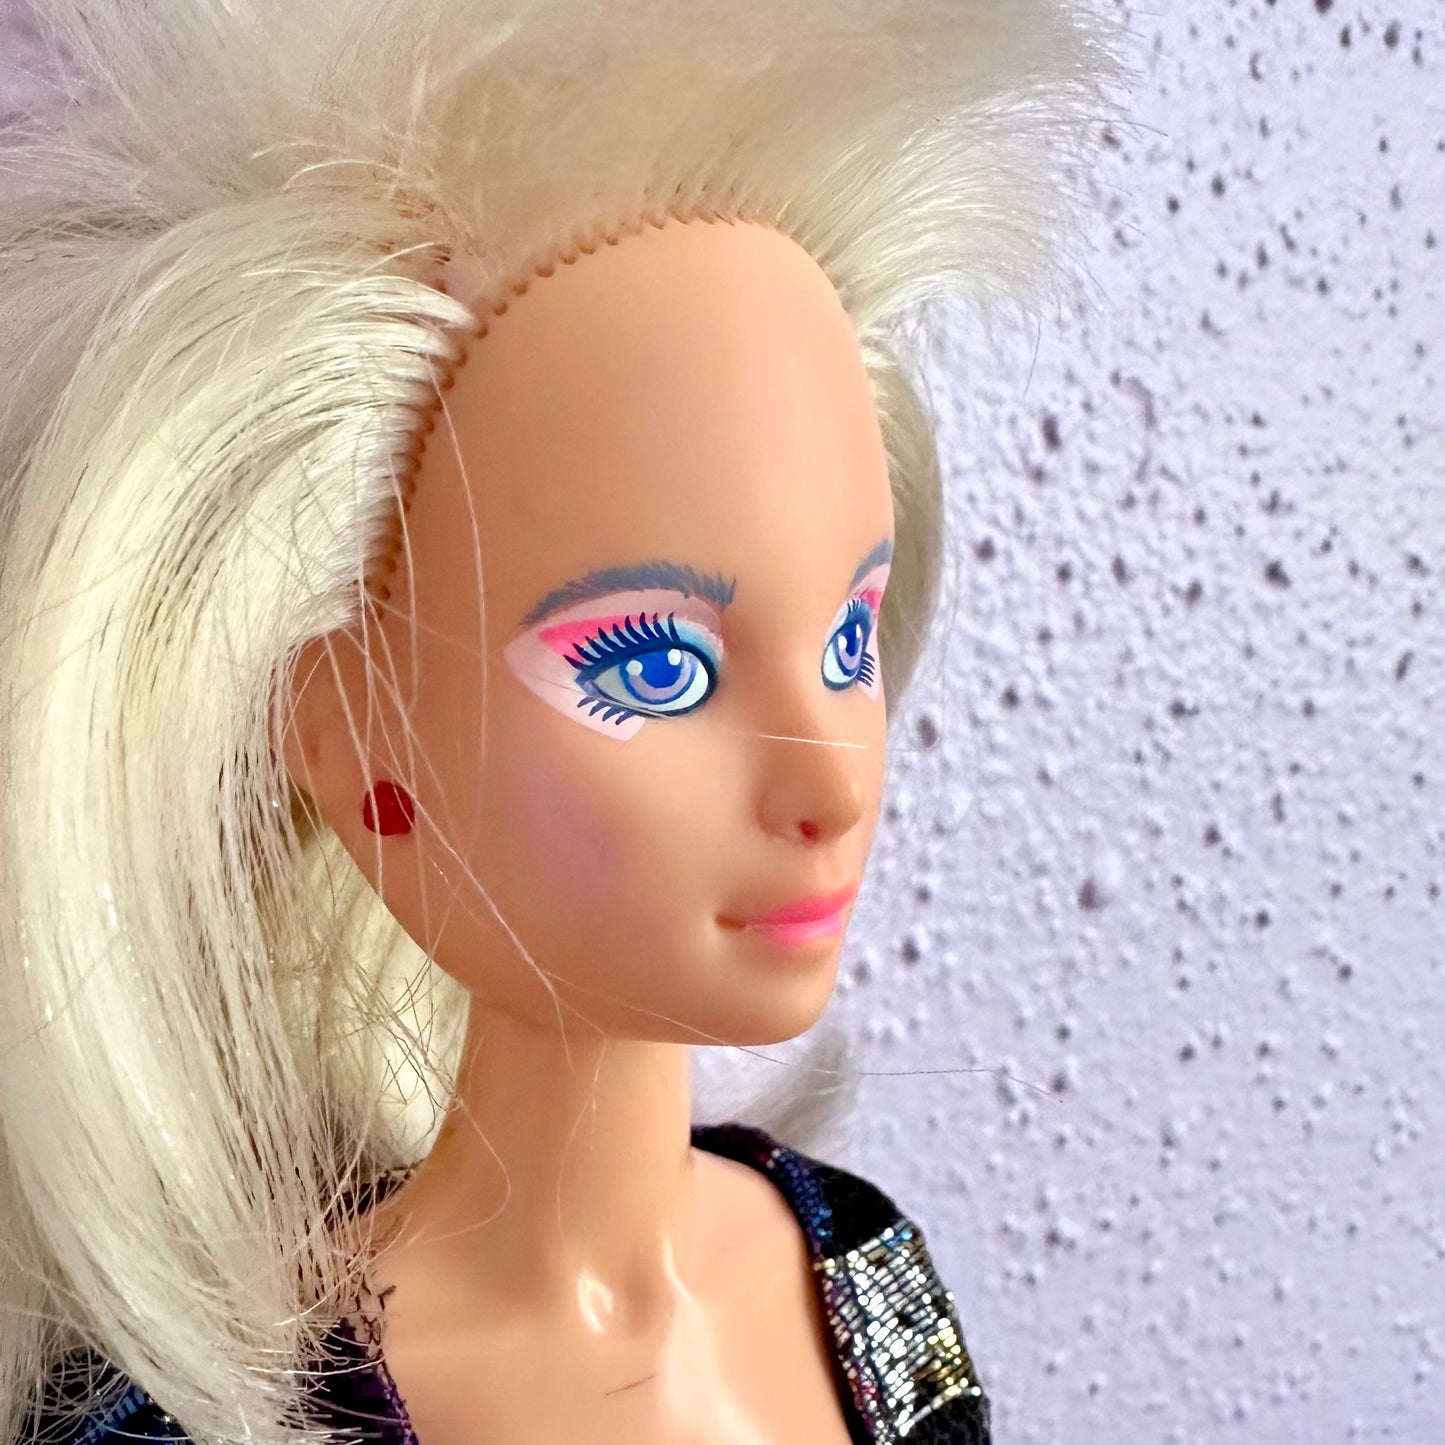 1985 Hasbro “Jerrica” Jem and the Holograms Doll